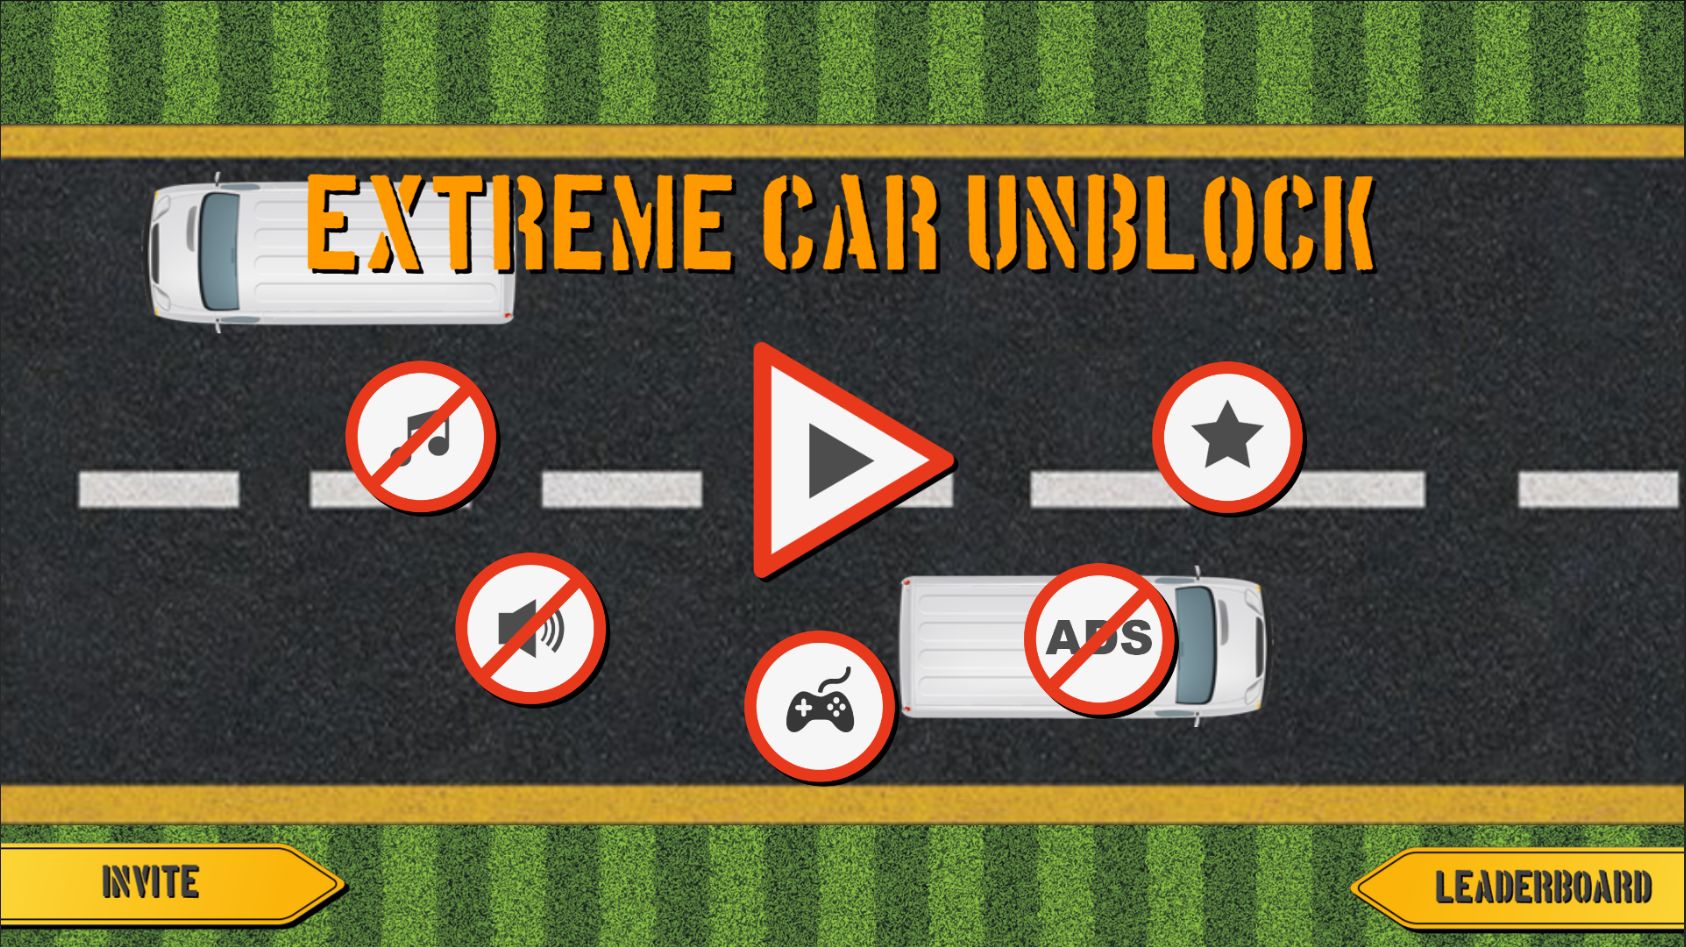 Extreme Car Unblock Complete Unity Project by Pngeeteh Codester